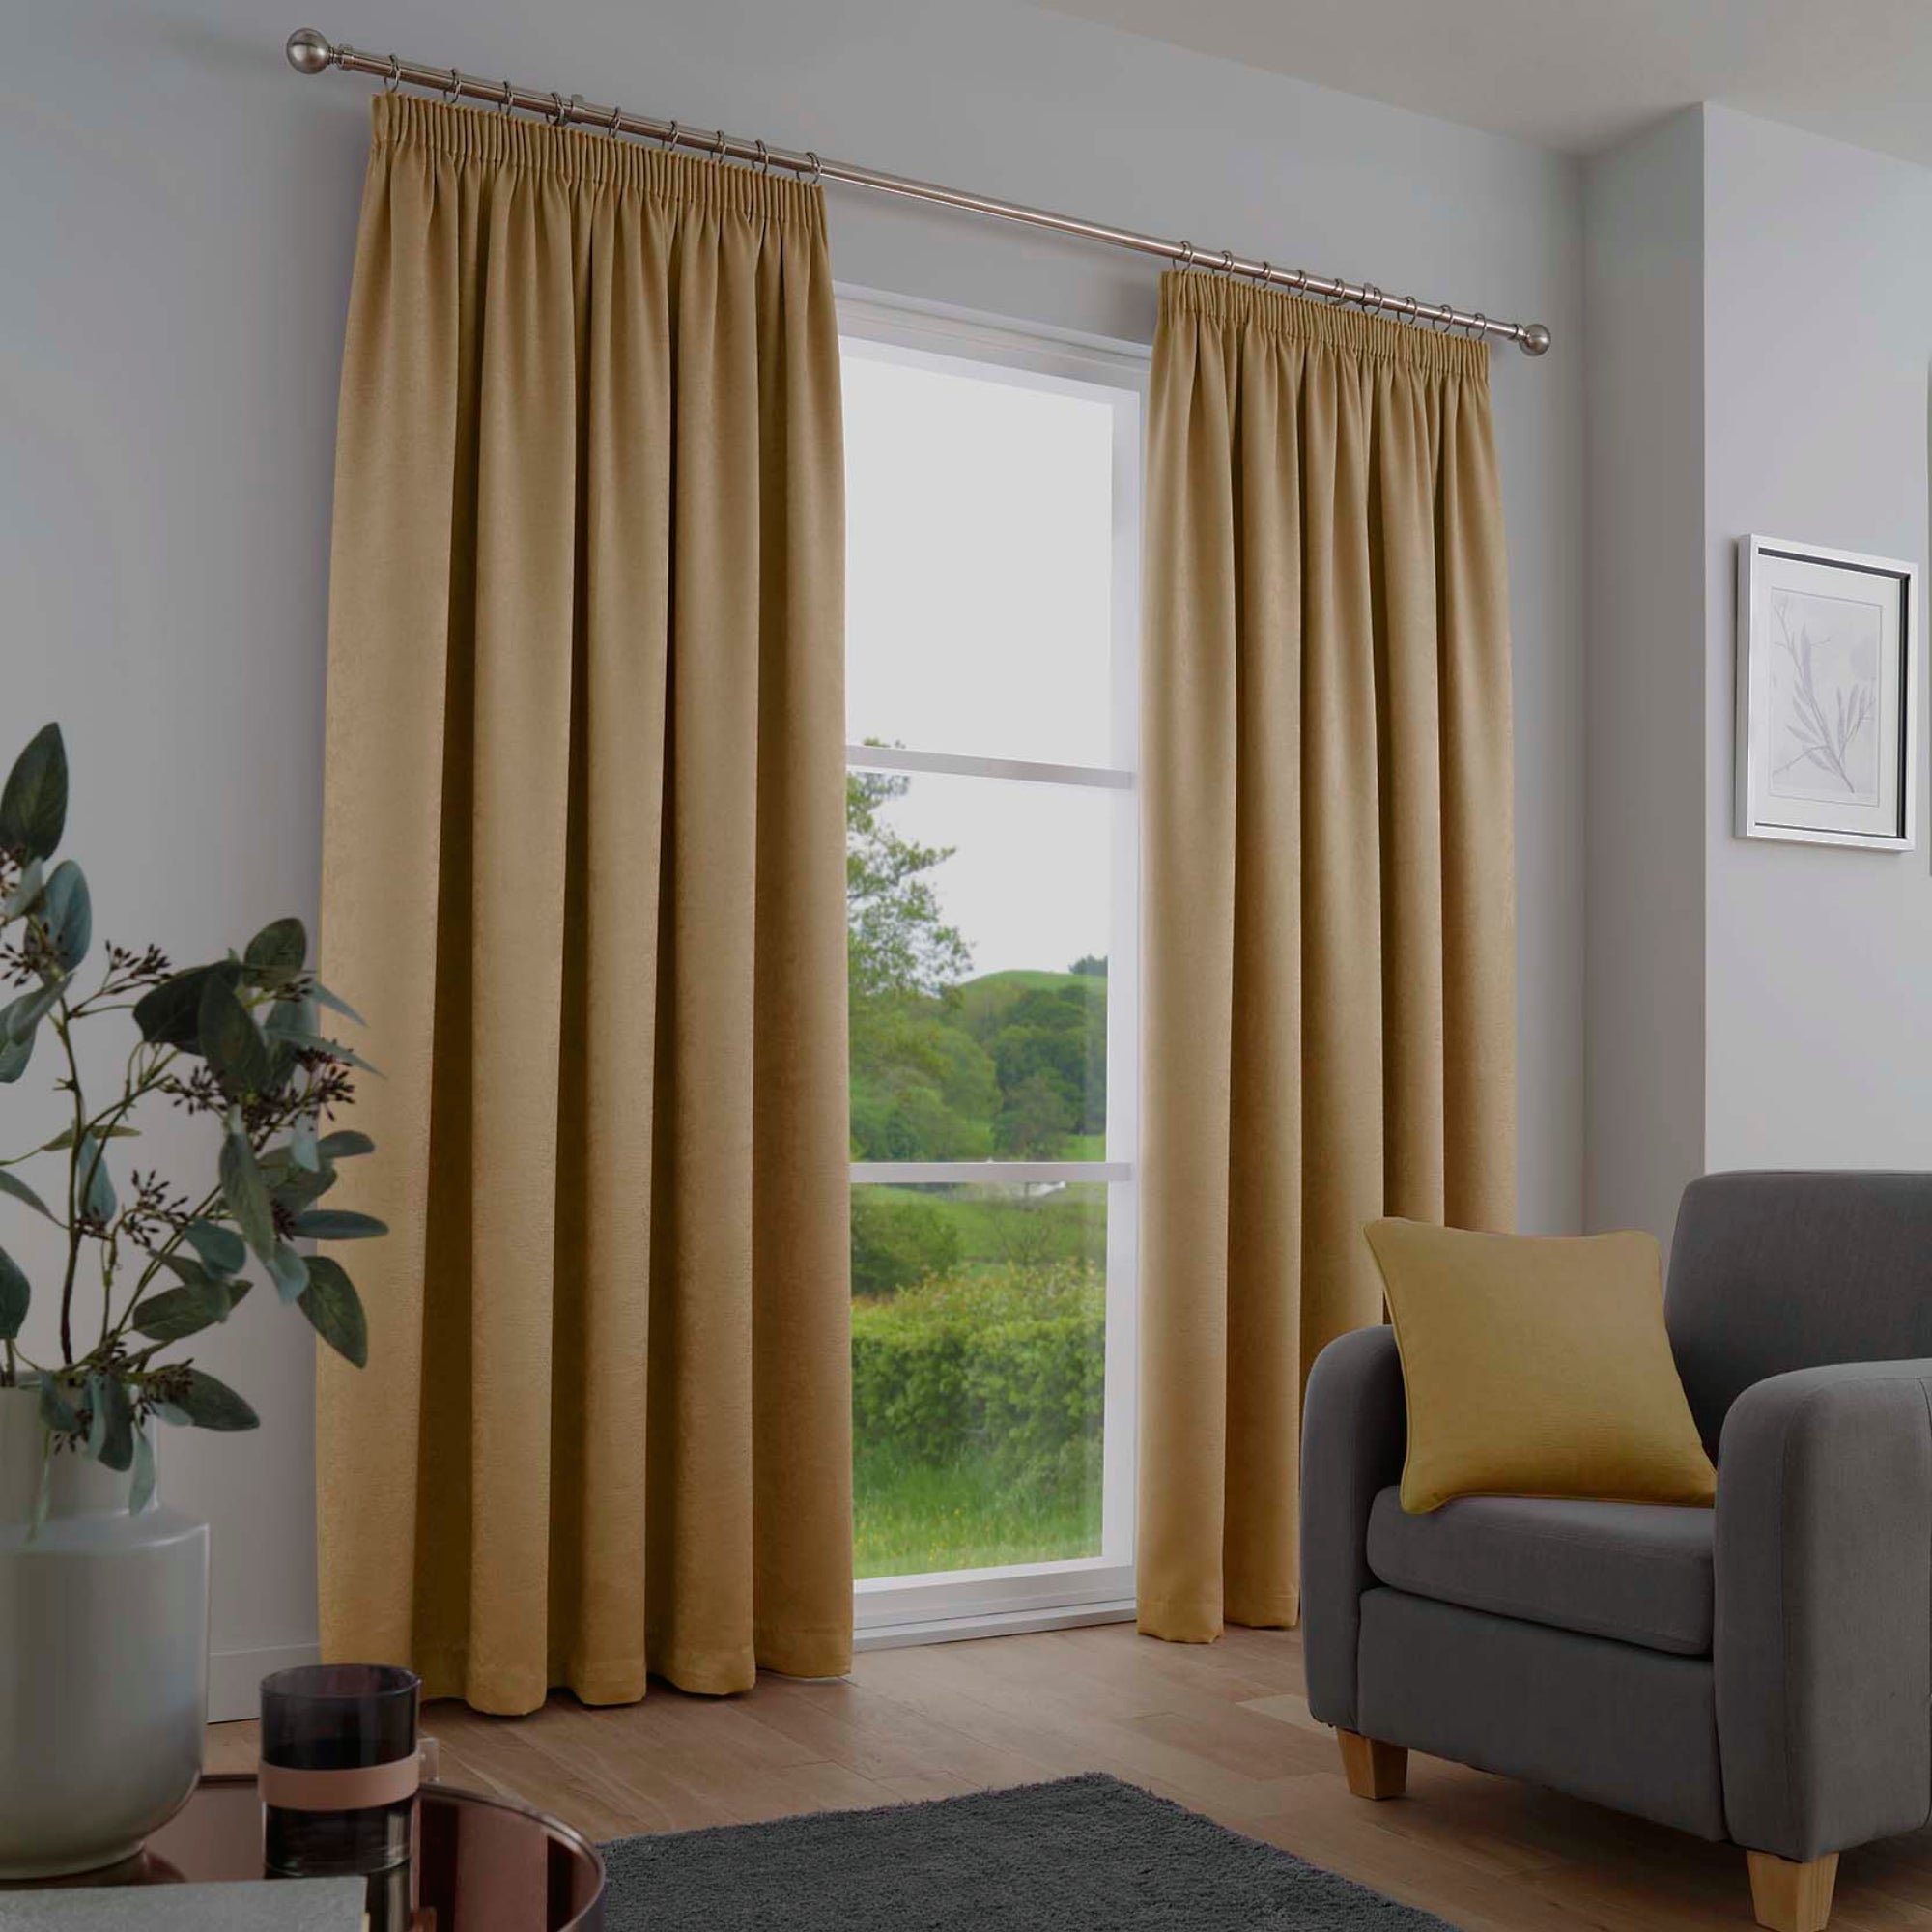 Pair of Pencil Pleat Curtains Galaxy by Fusion in Ochre